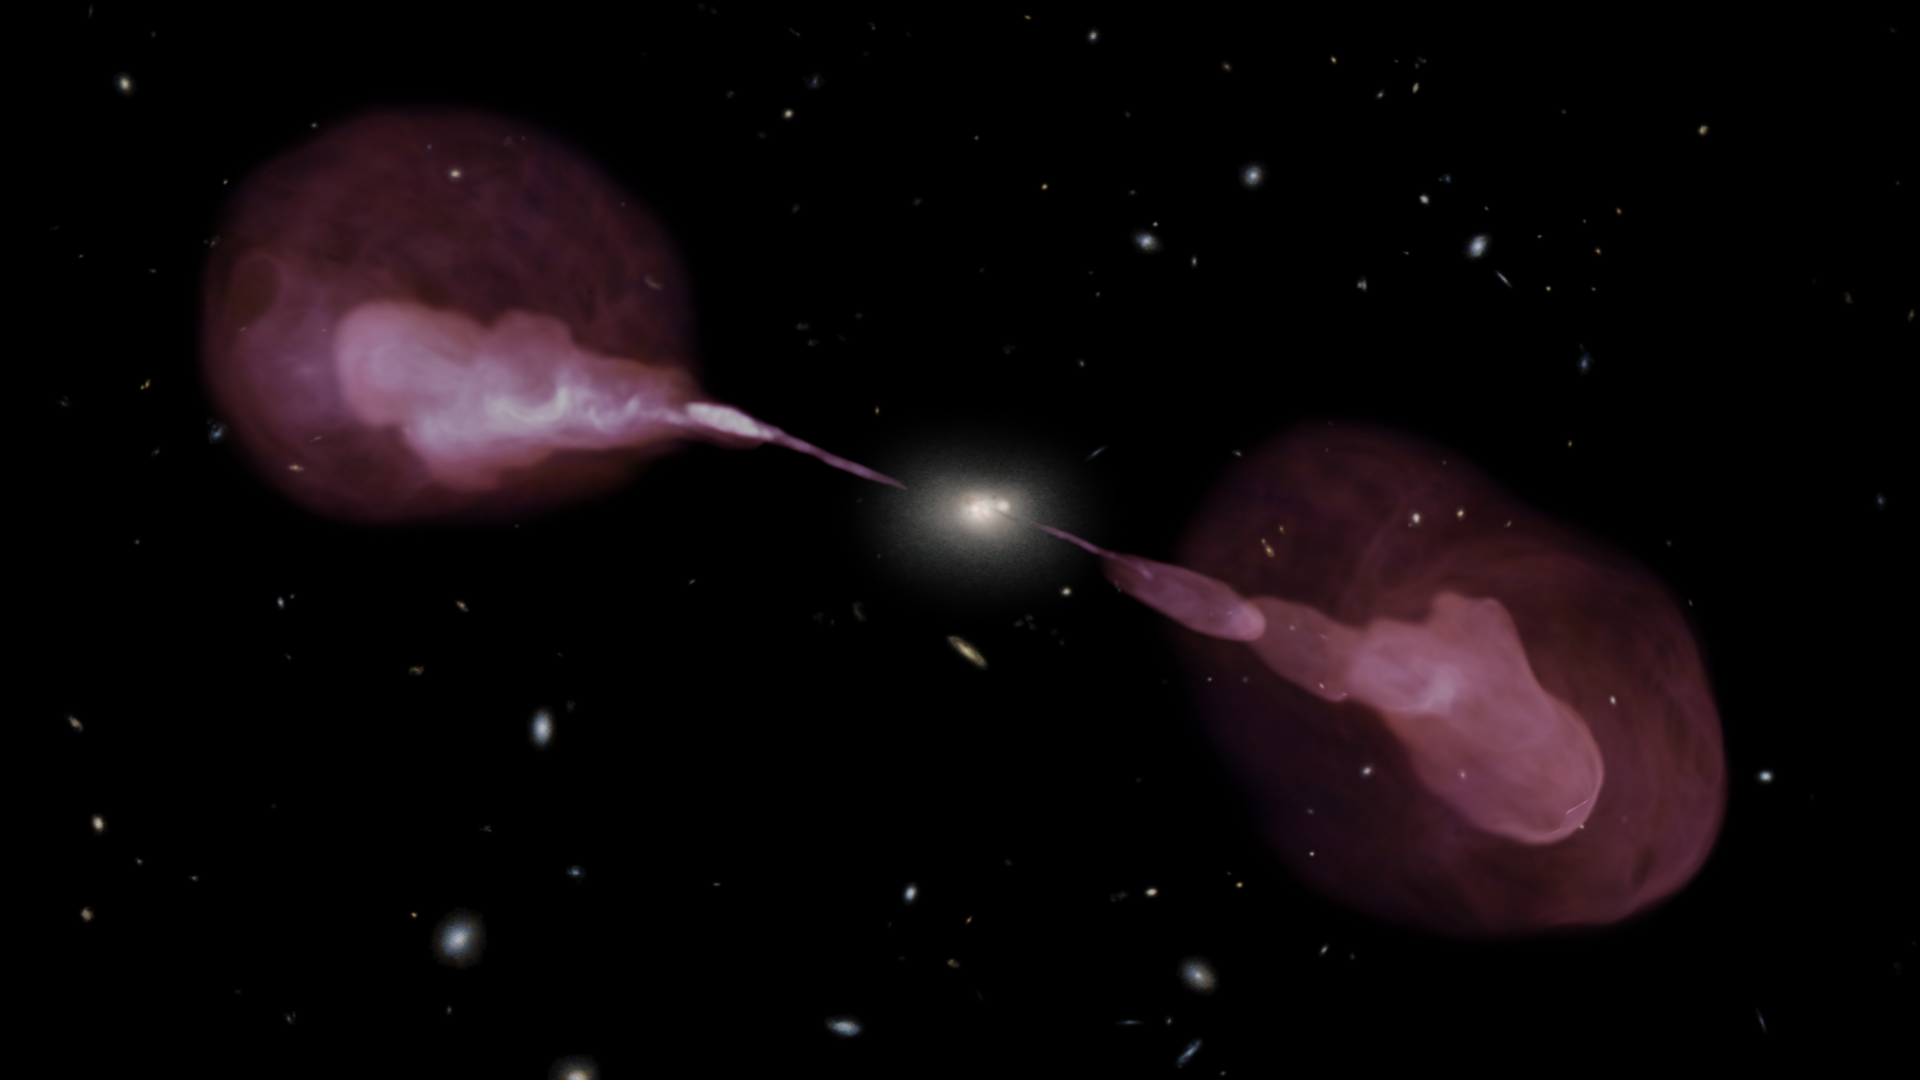 A comparison of visible and radio views of the active galaxy Hercules A